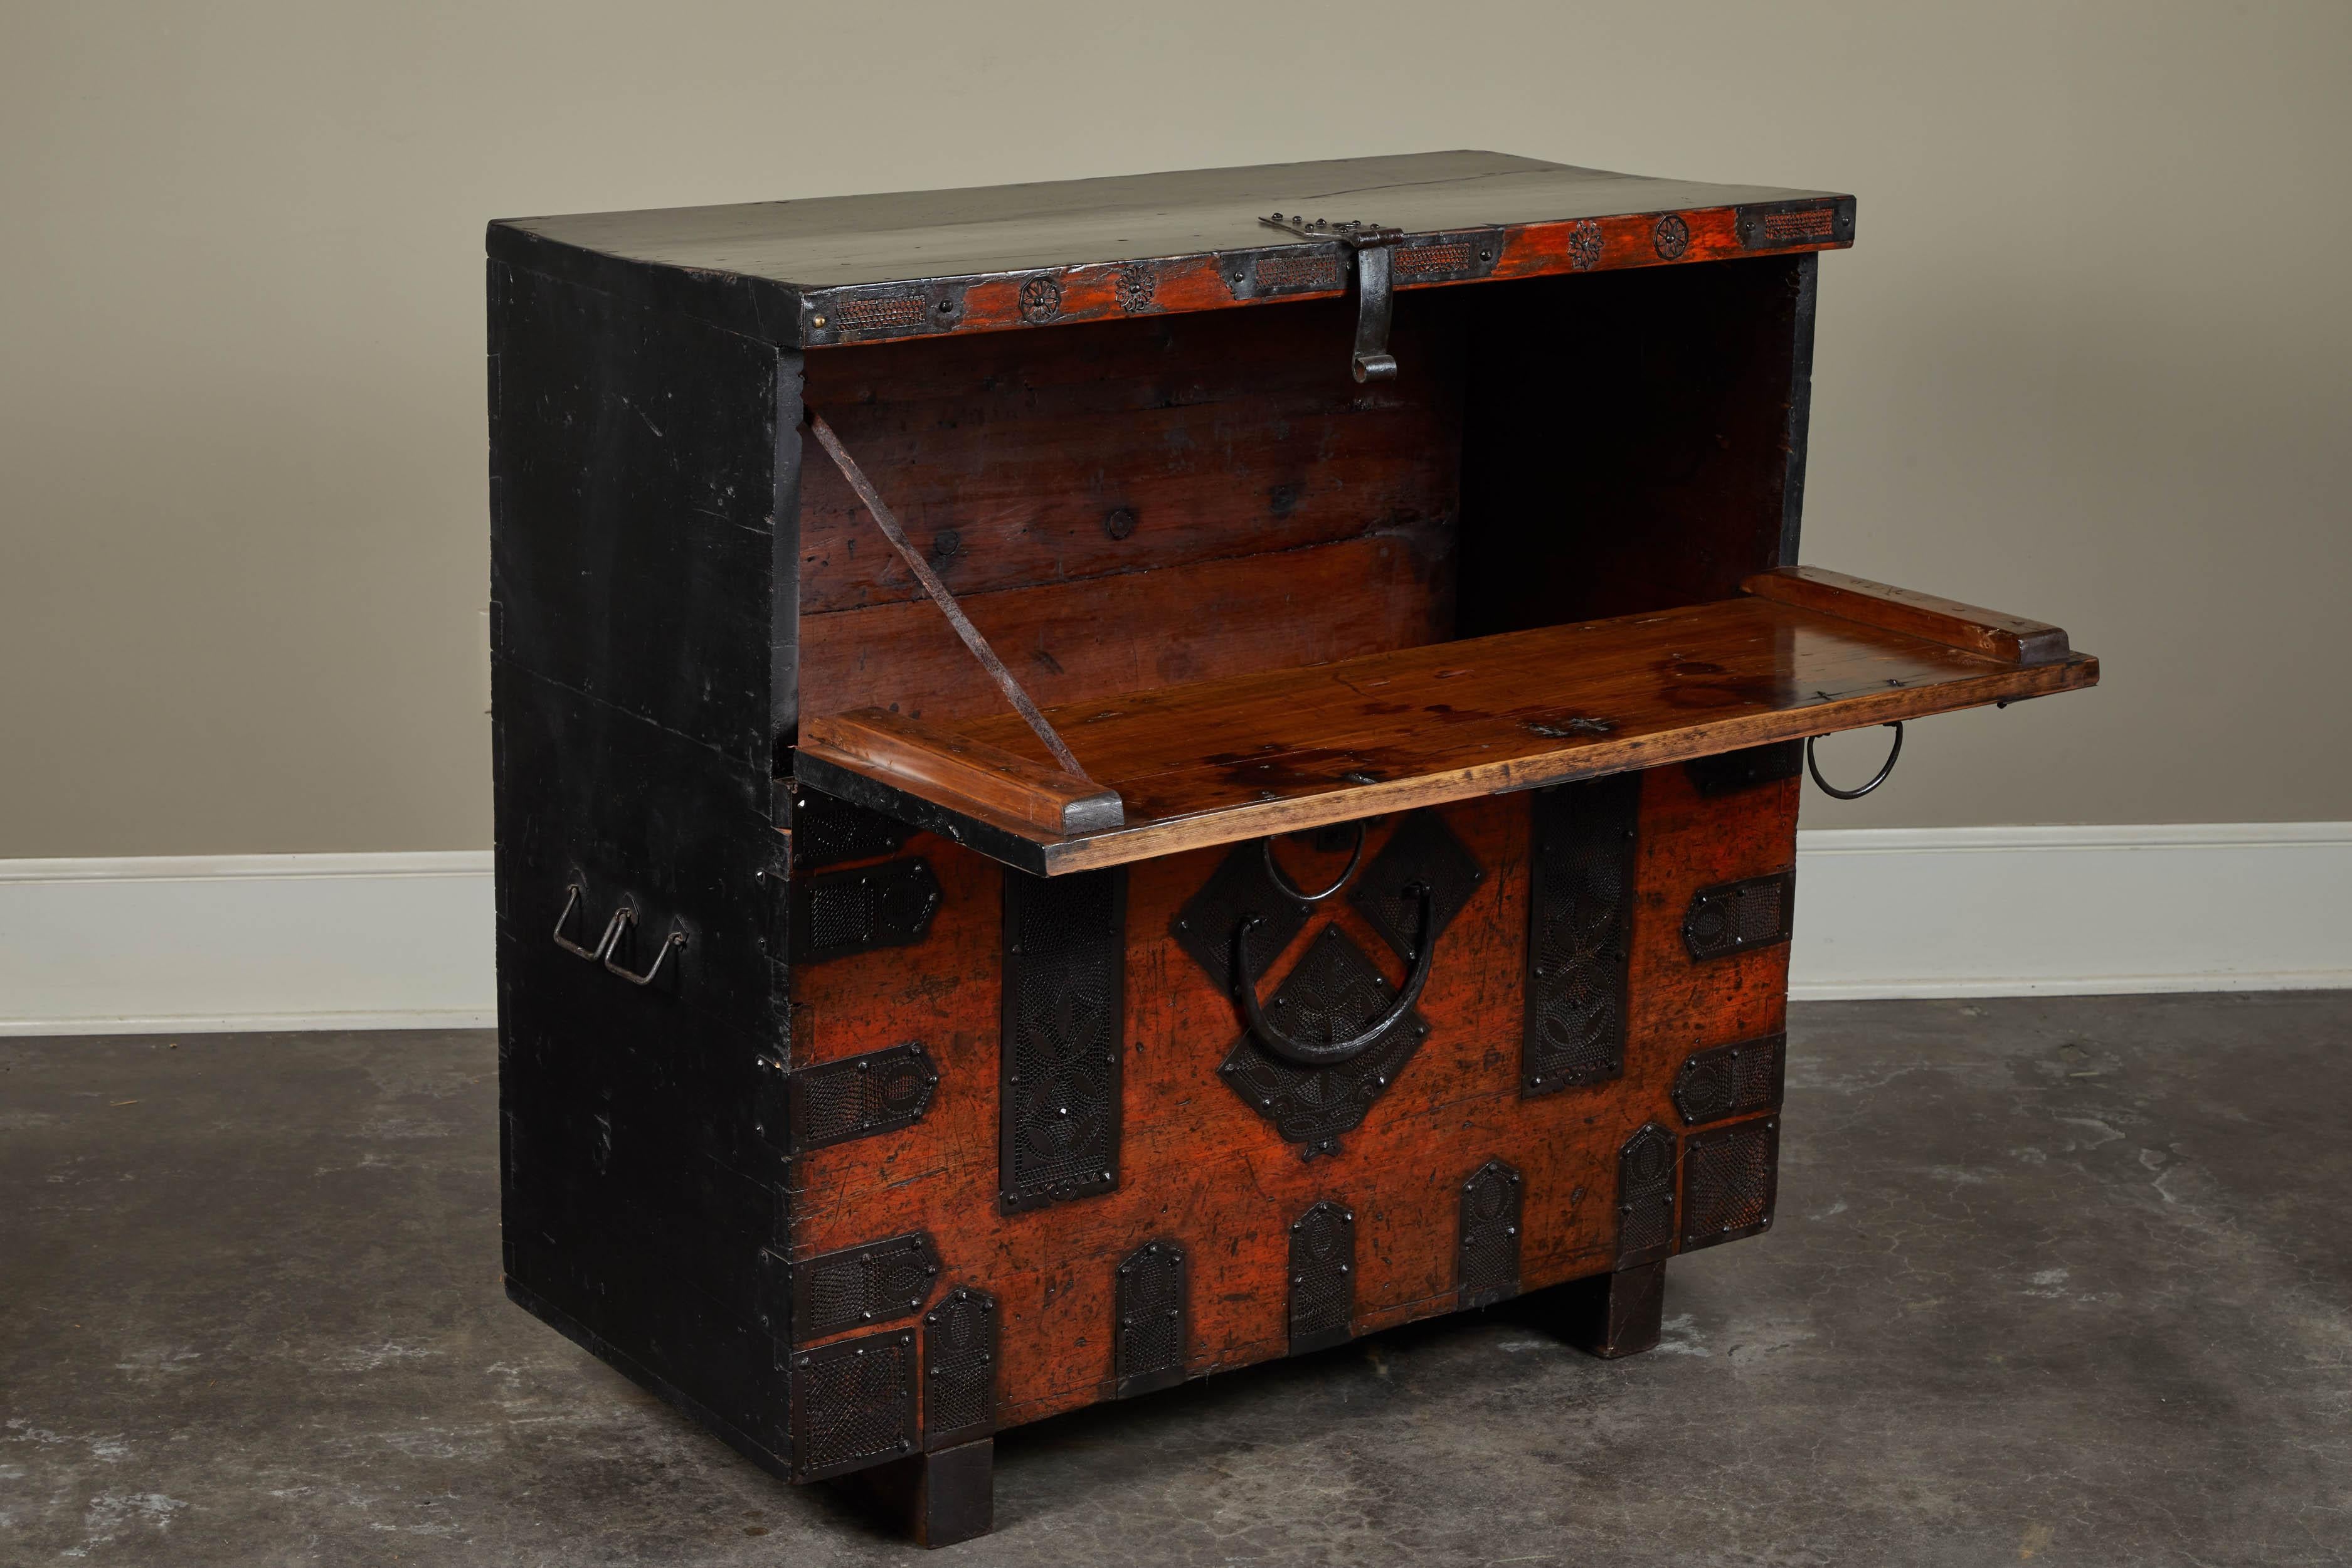 Rare 19th century Korean chest. Unusual size makes it a rare piece. Beautiful iron hardware decorate the face and lid. Two available, not quite a pair. Sold individually.